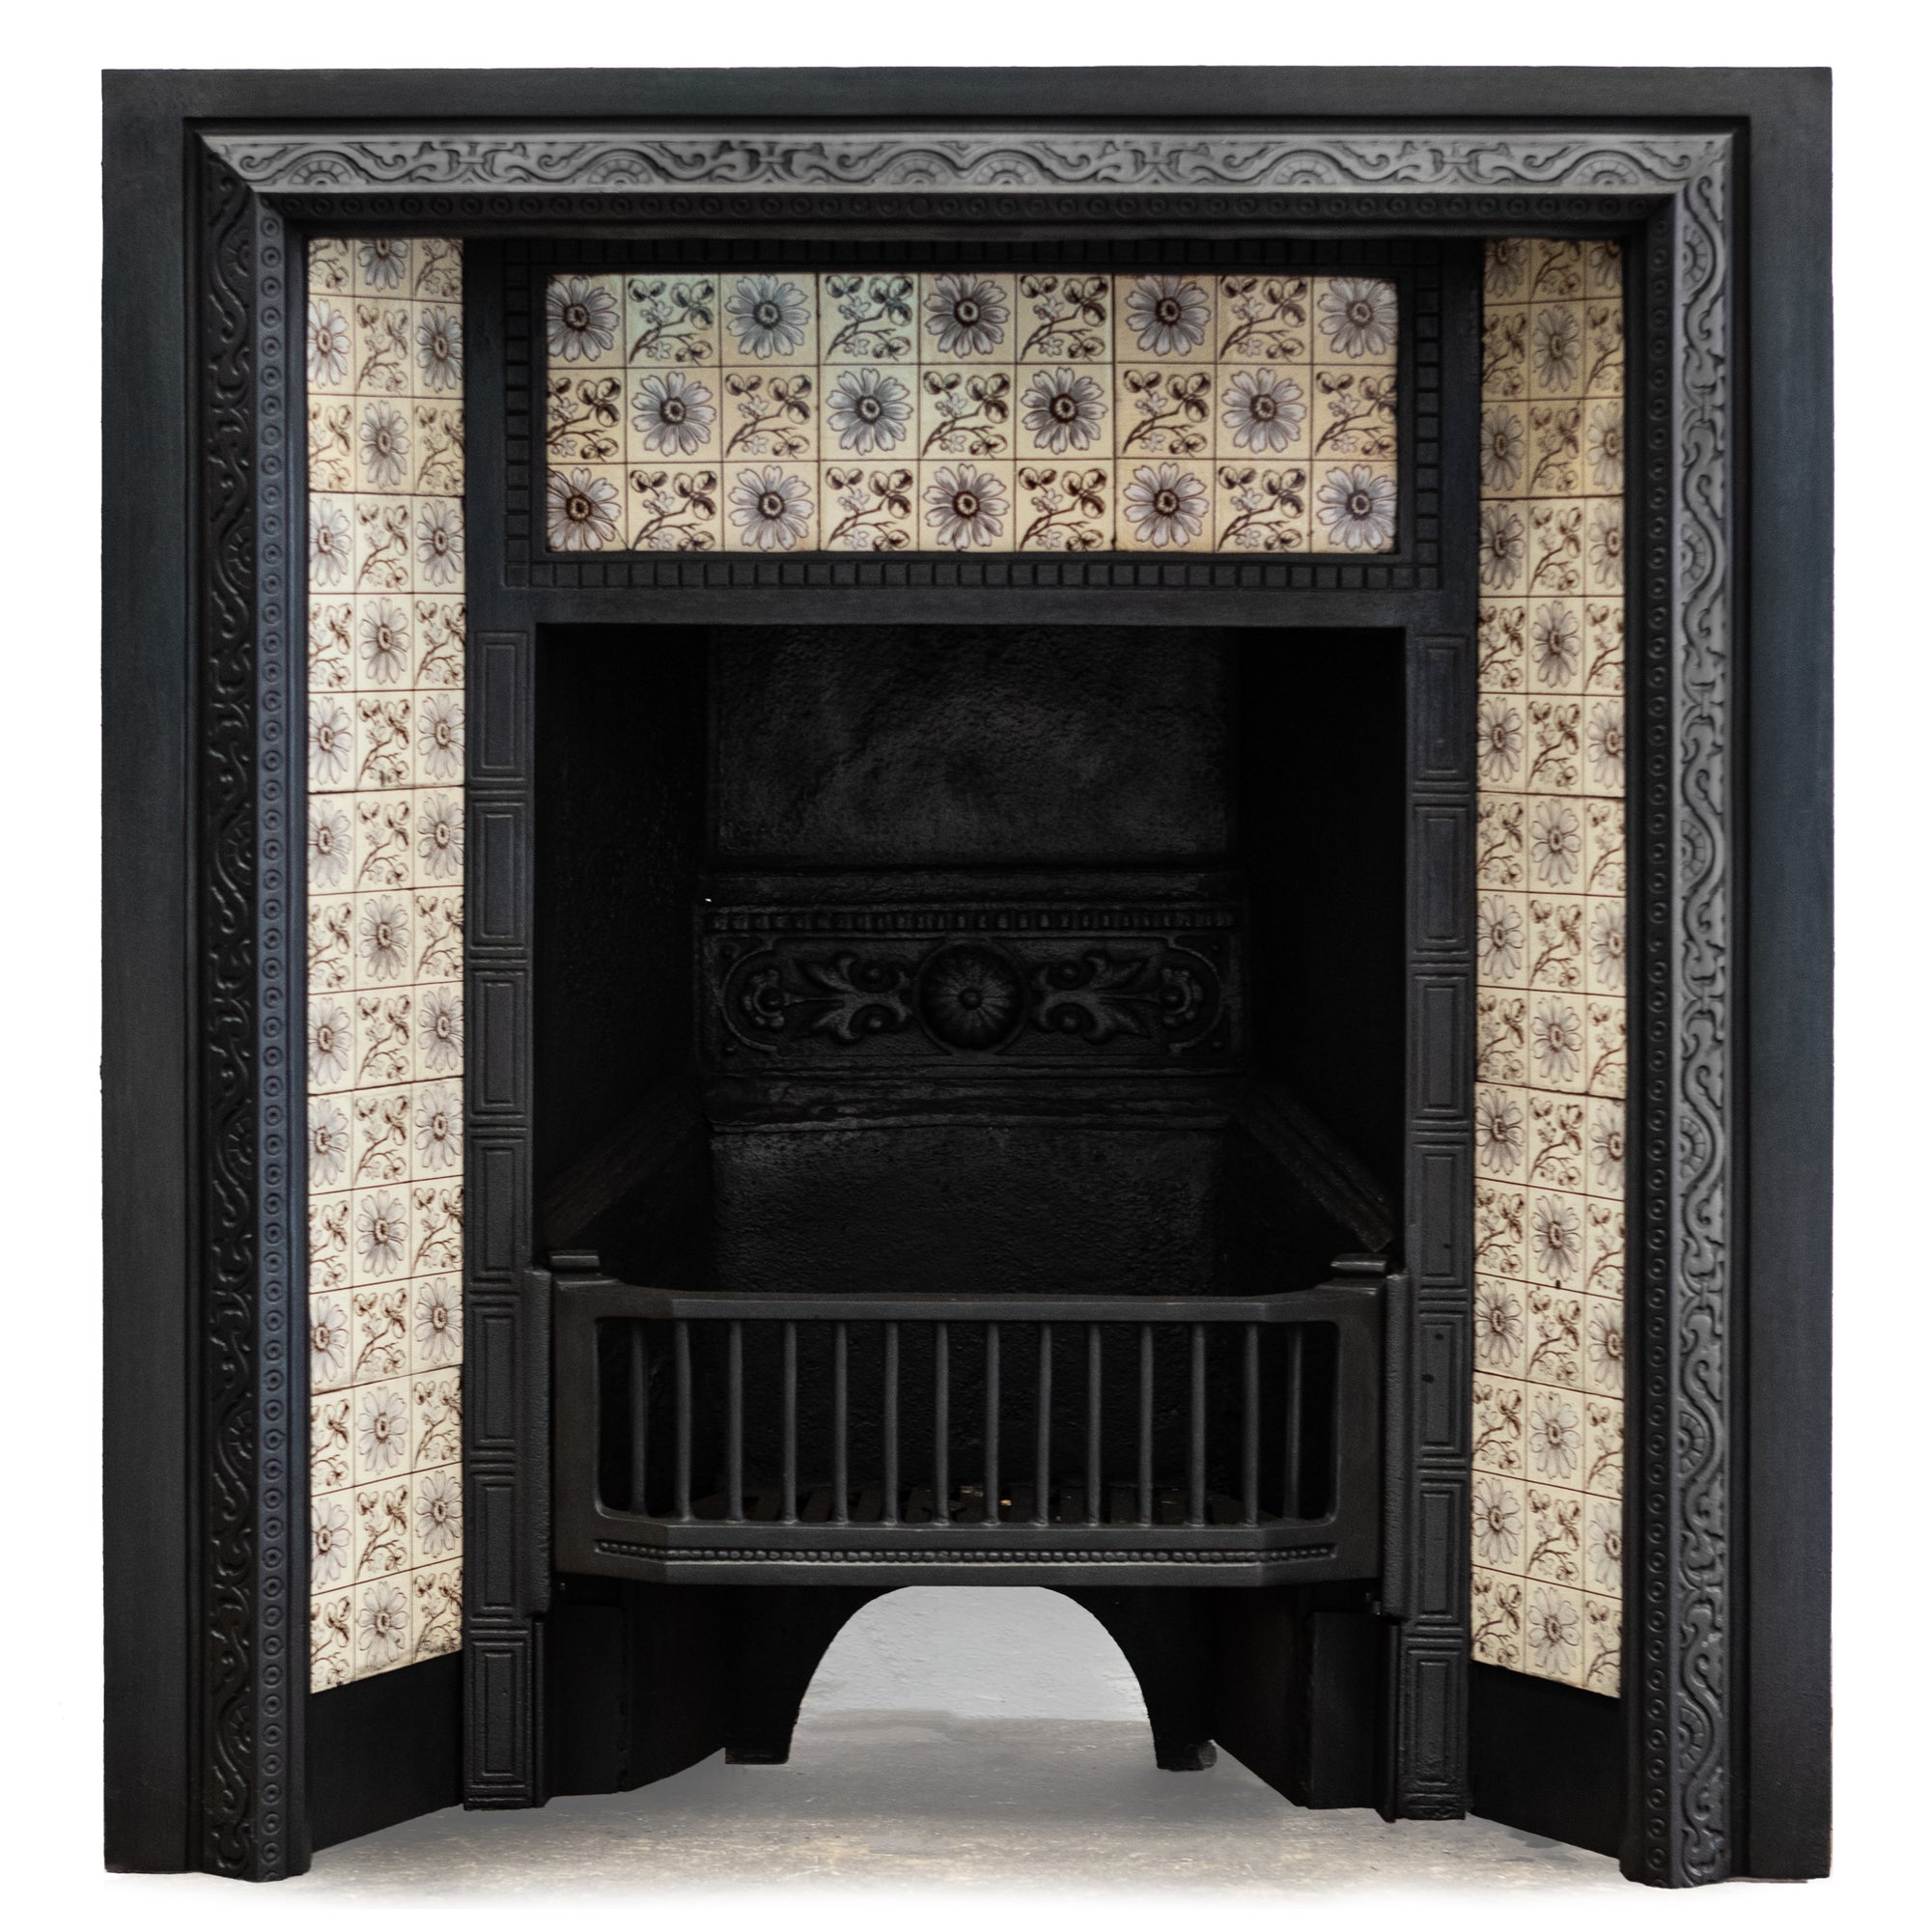 Antique Cast Iron Fireplace Insert With Pale Blue Floral Tiles | The Architectural Forum